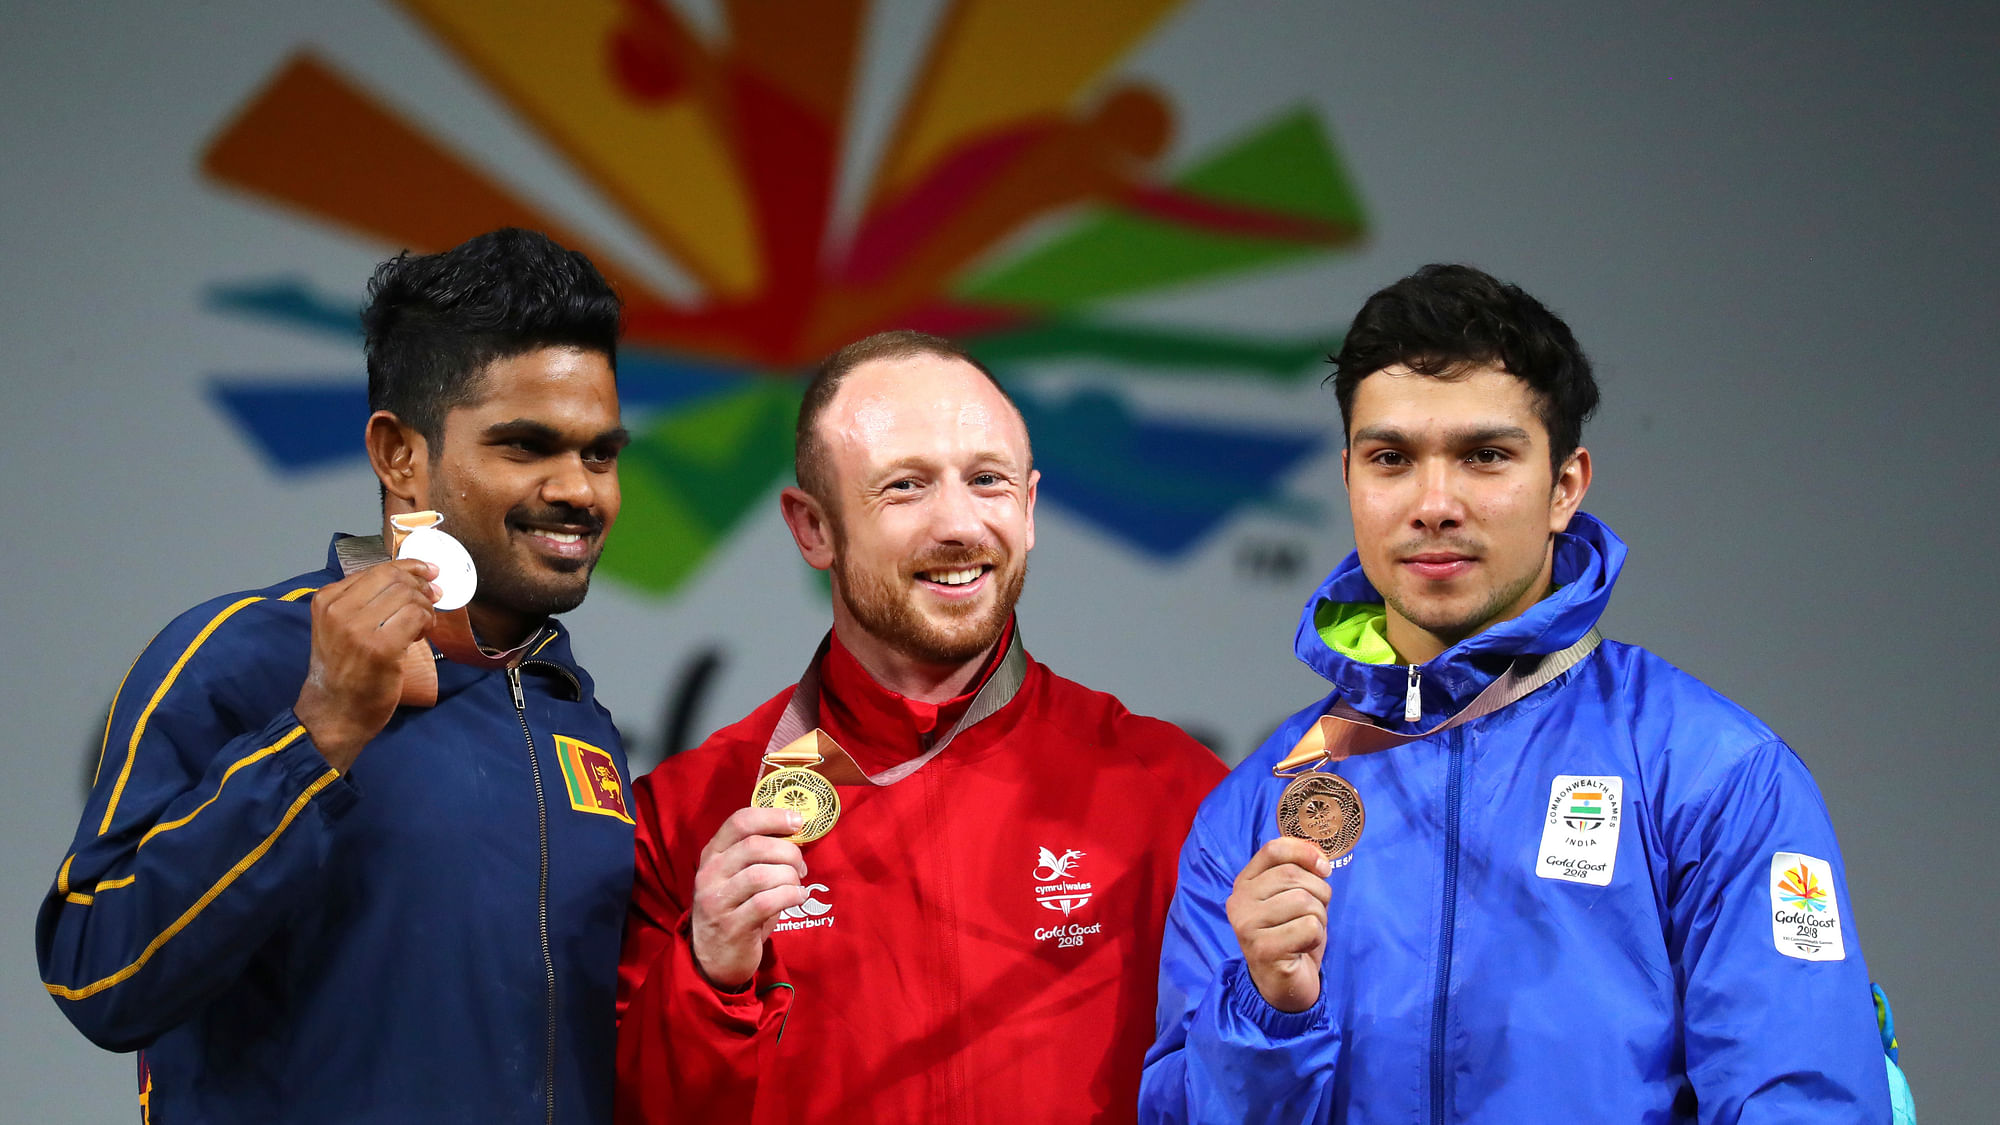 Wales’s men’s 69Kg Weightlifting Gold medalist Gareth Evans, center, stands with Sri Lanka’s Silver medalist Mudiyanselage Dissanayake, left, and India’s Bronze medalist Deepak Lather pose for the photographers after the medal ceremony at the Commonwealth Games, in Gold Coast, Australia